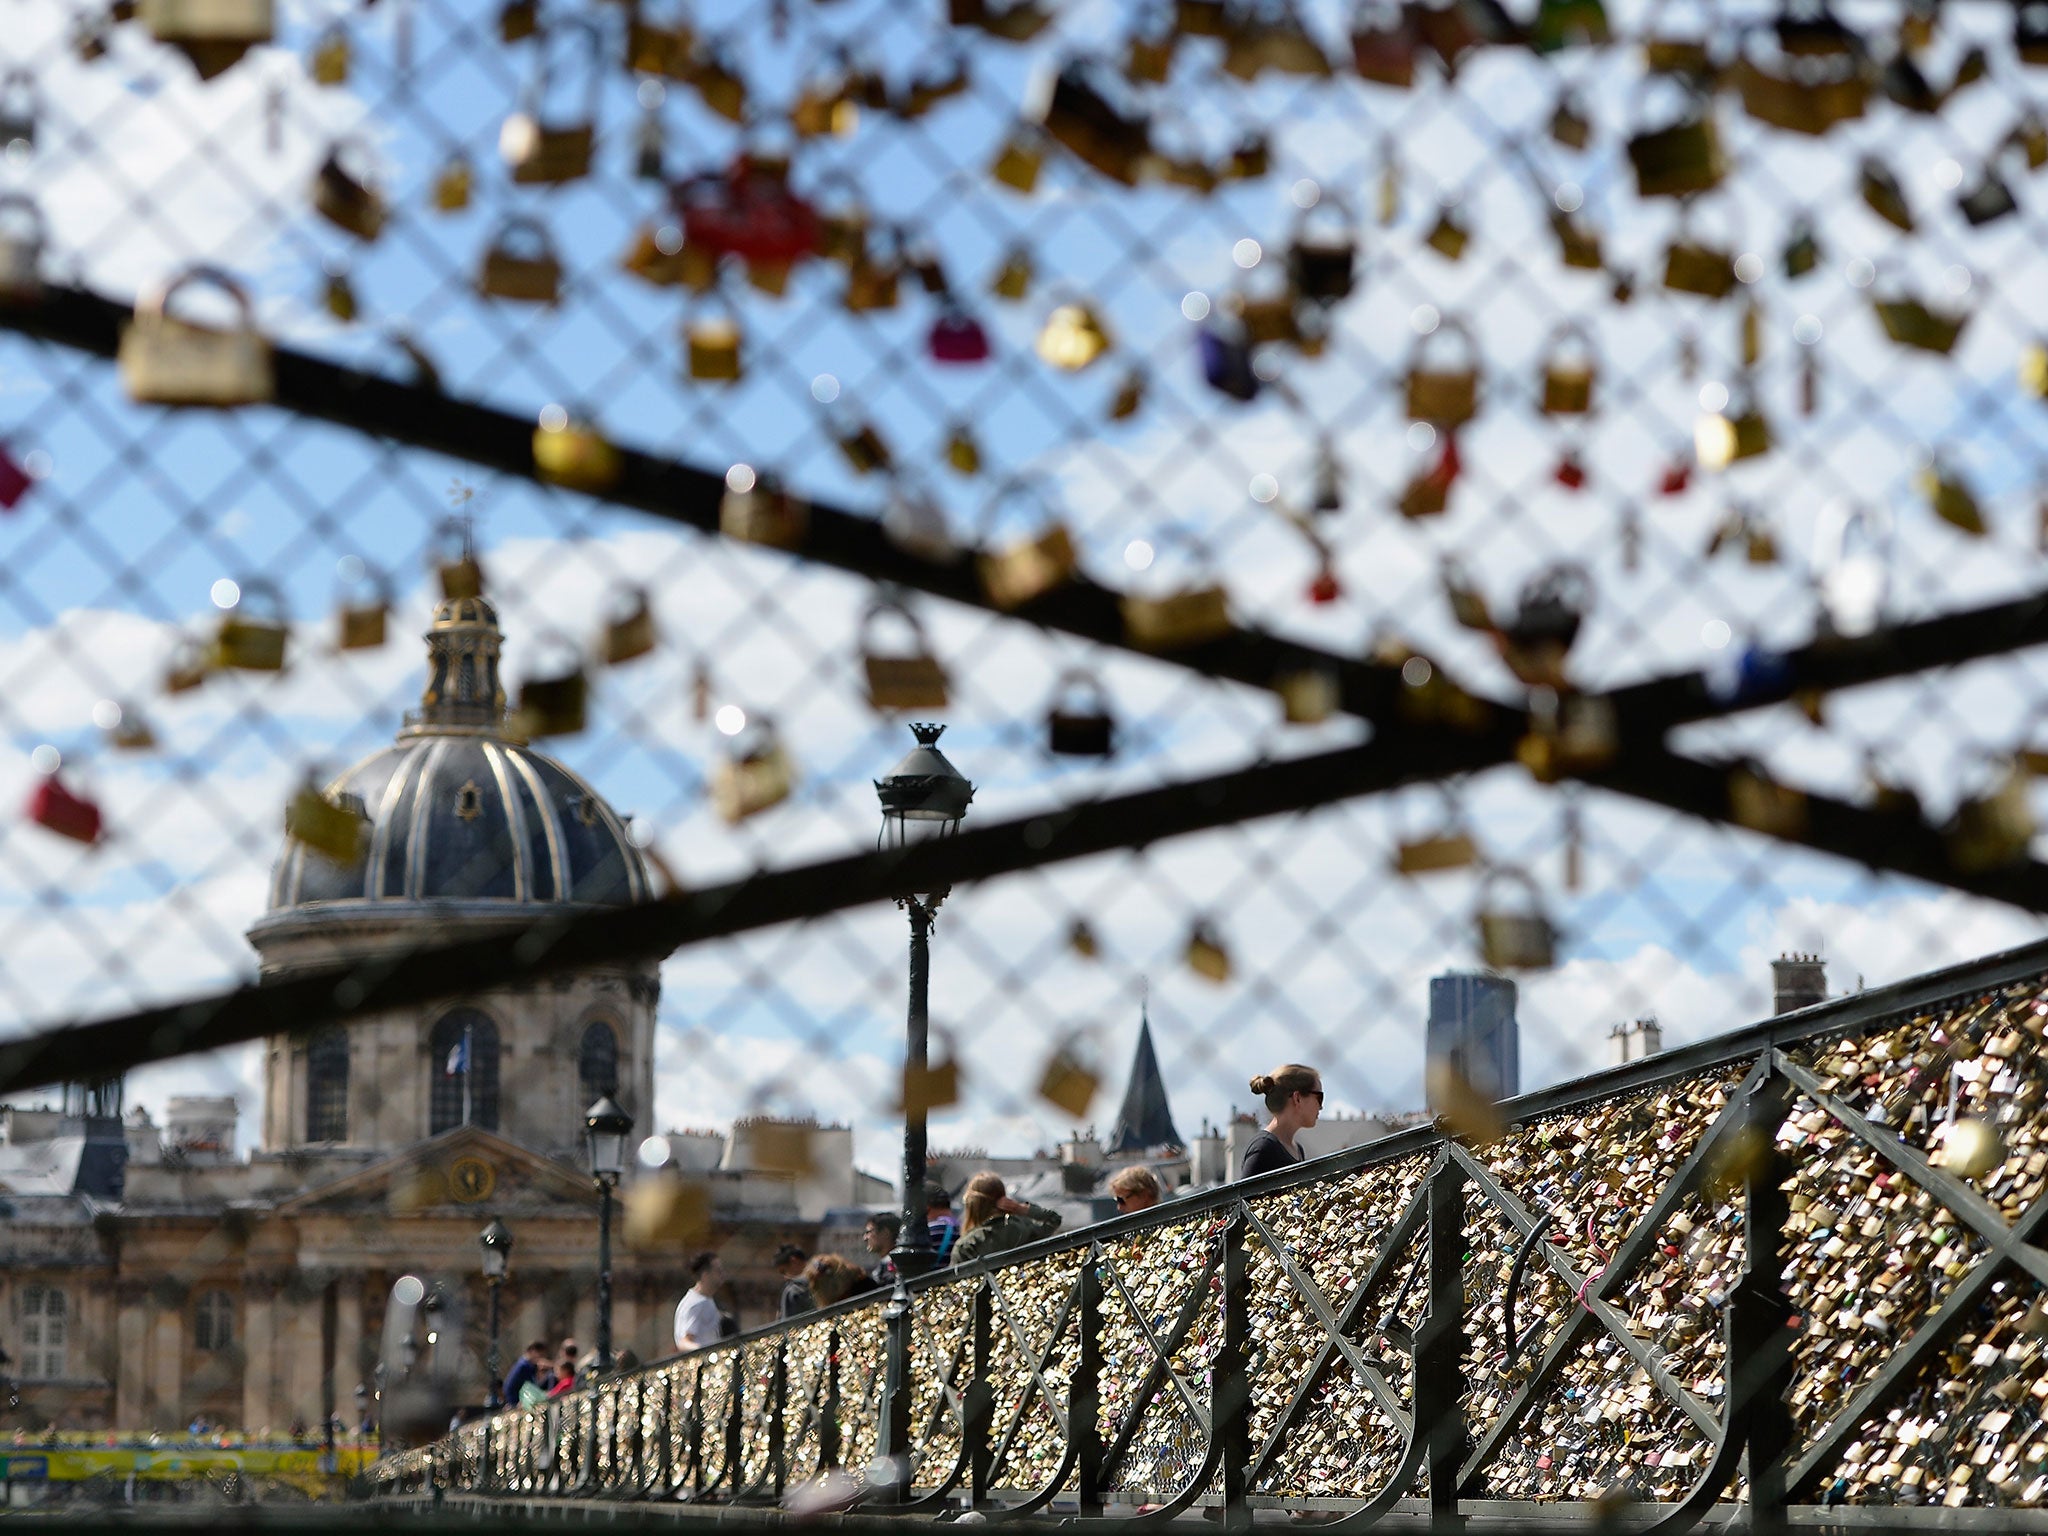 Lovers visiting Le Pont des Arts in Paris have left thousands of padlocks engraved with their initials